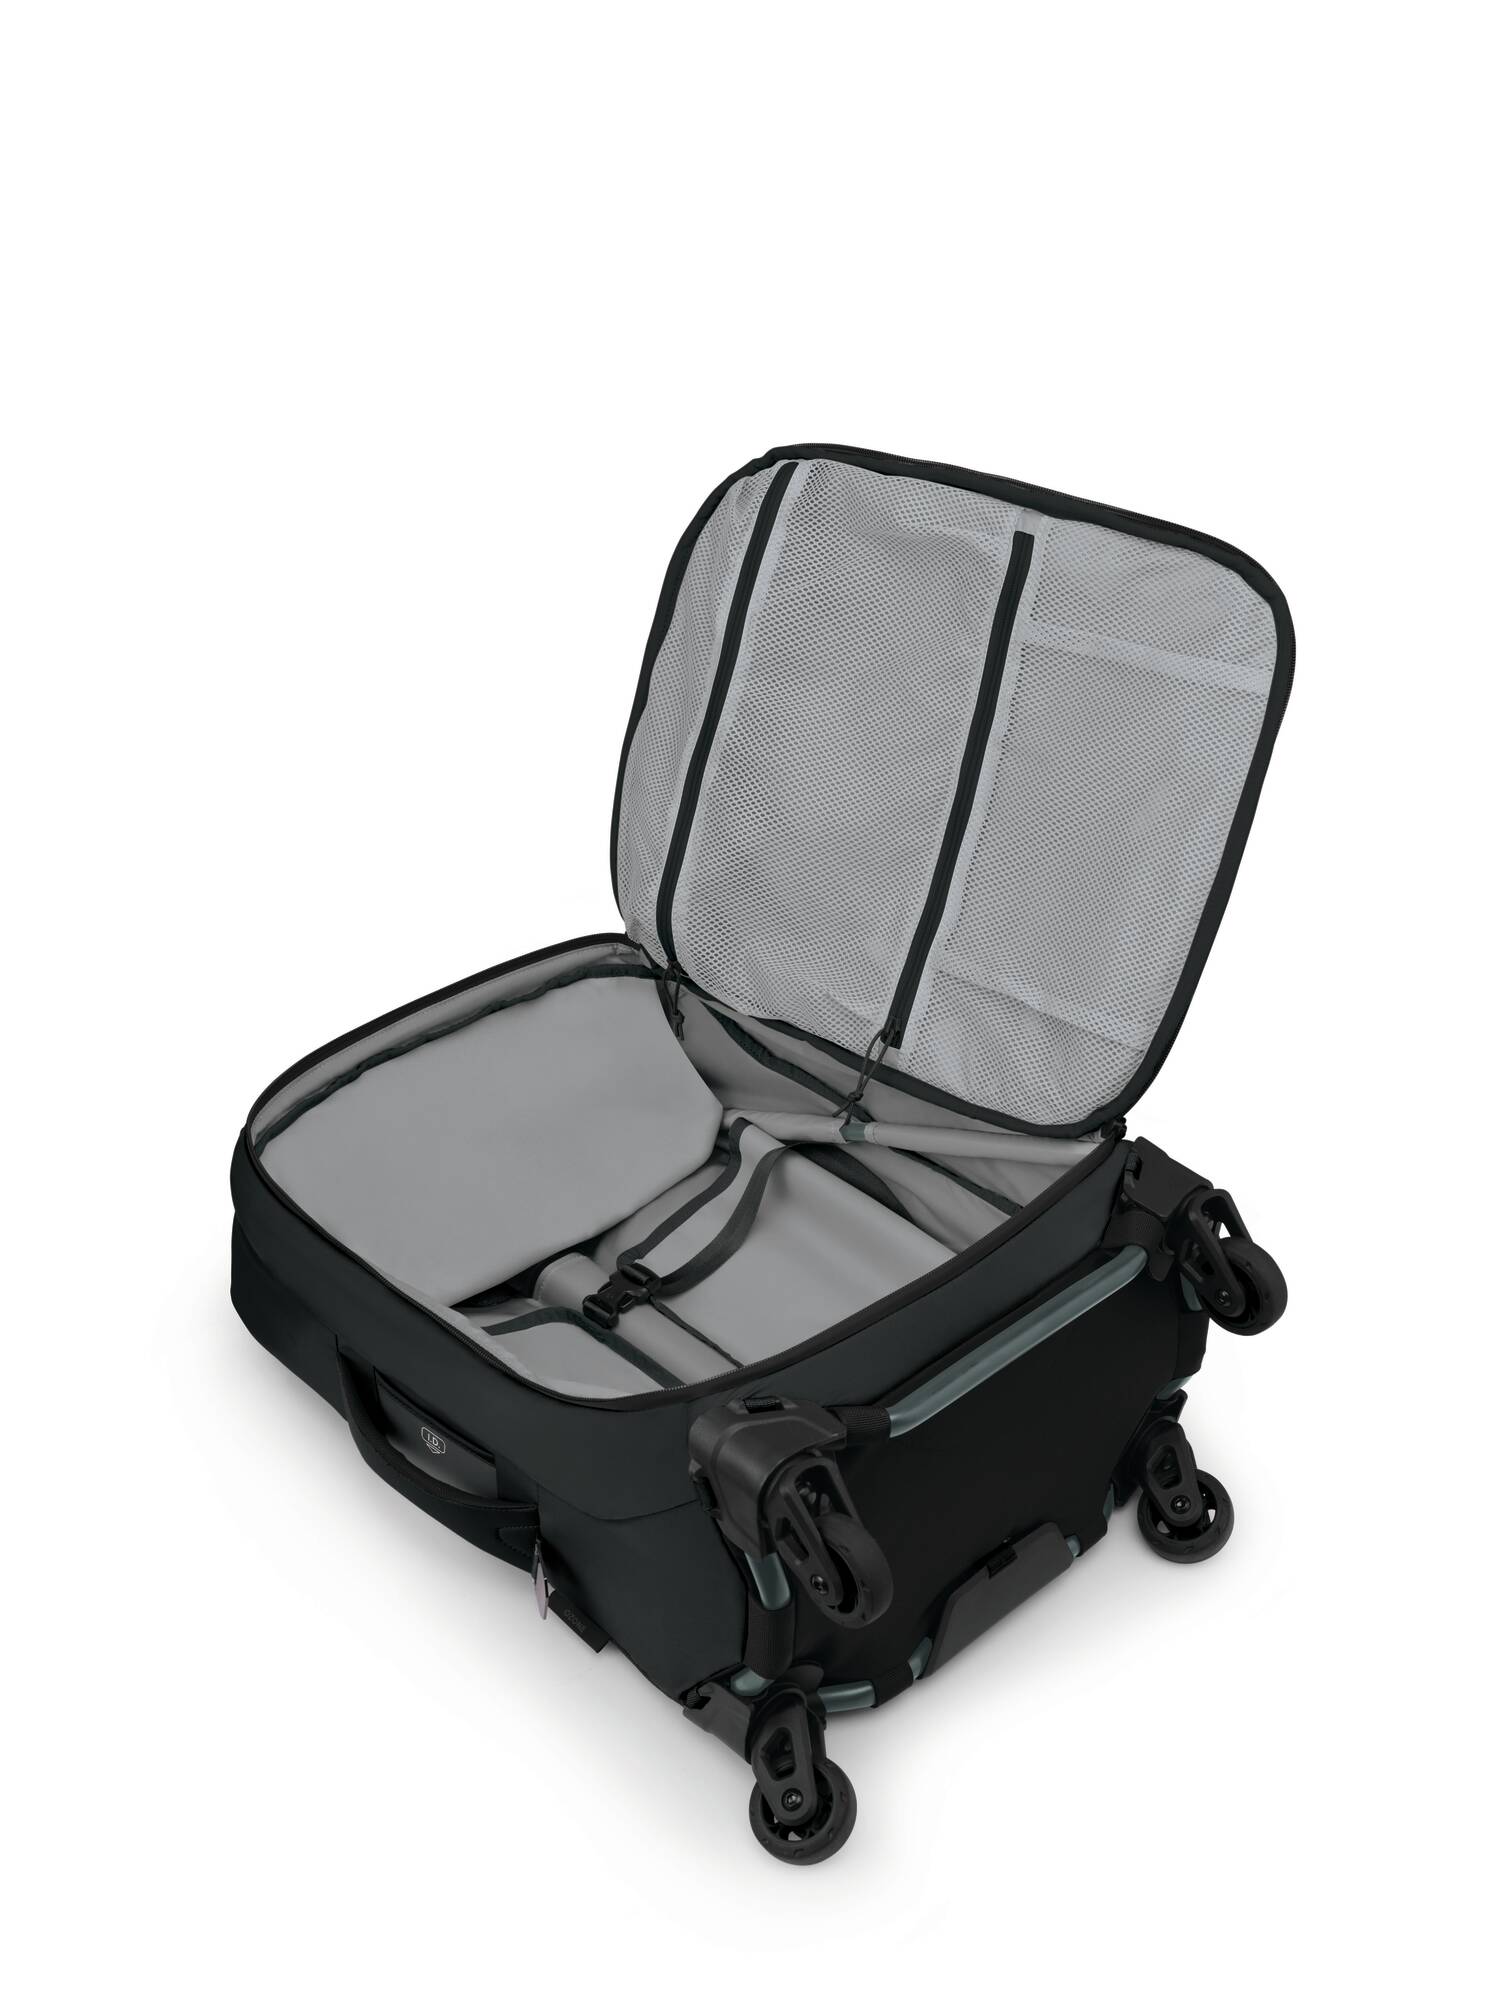 Ozone 4-Wheel Carry-on 38L